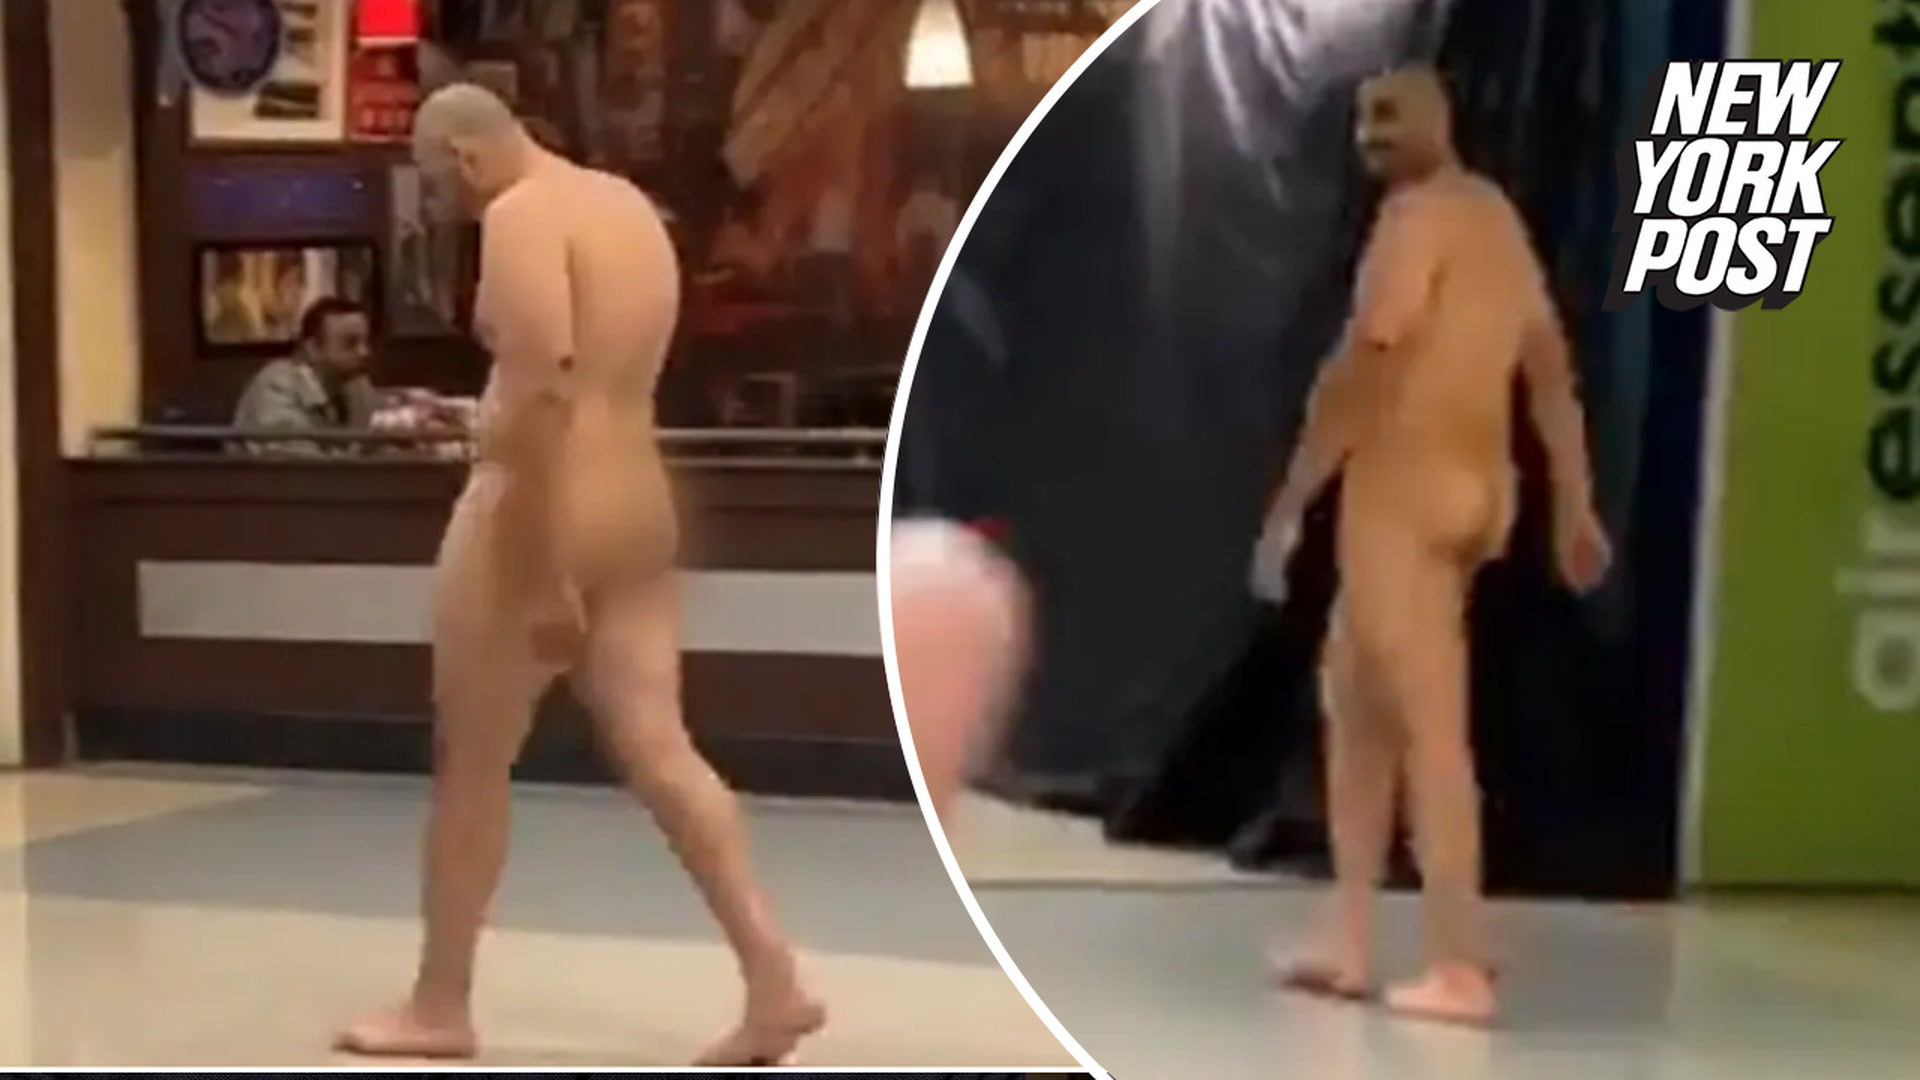 Video shows smiling naked man proudly strolling through Dallas-Fort Worth airport: 'My man!'